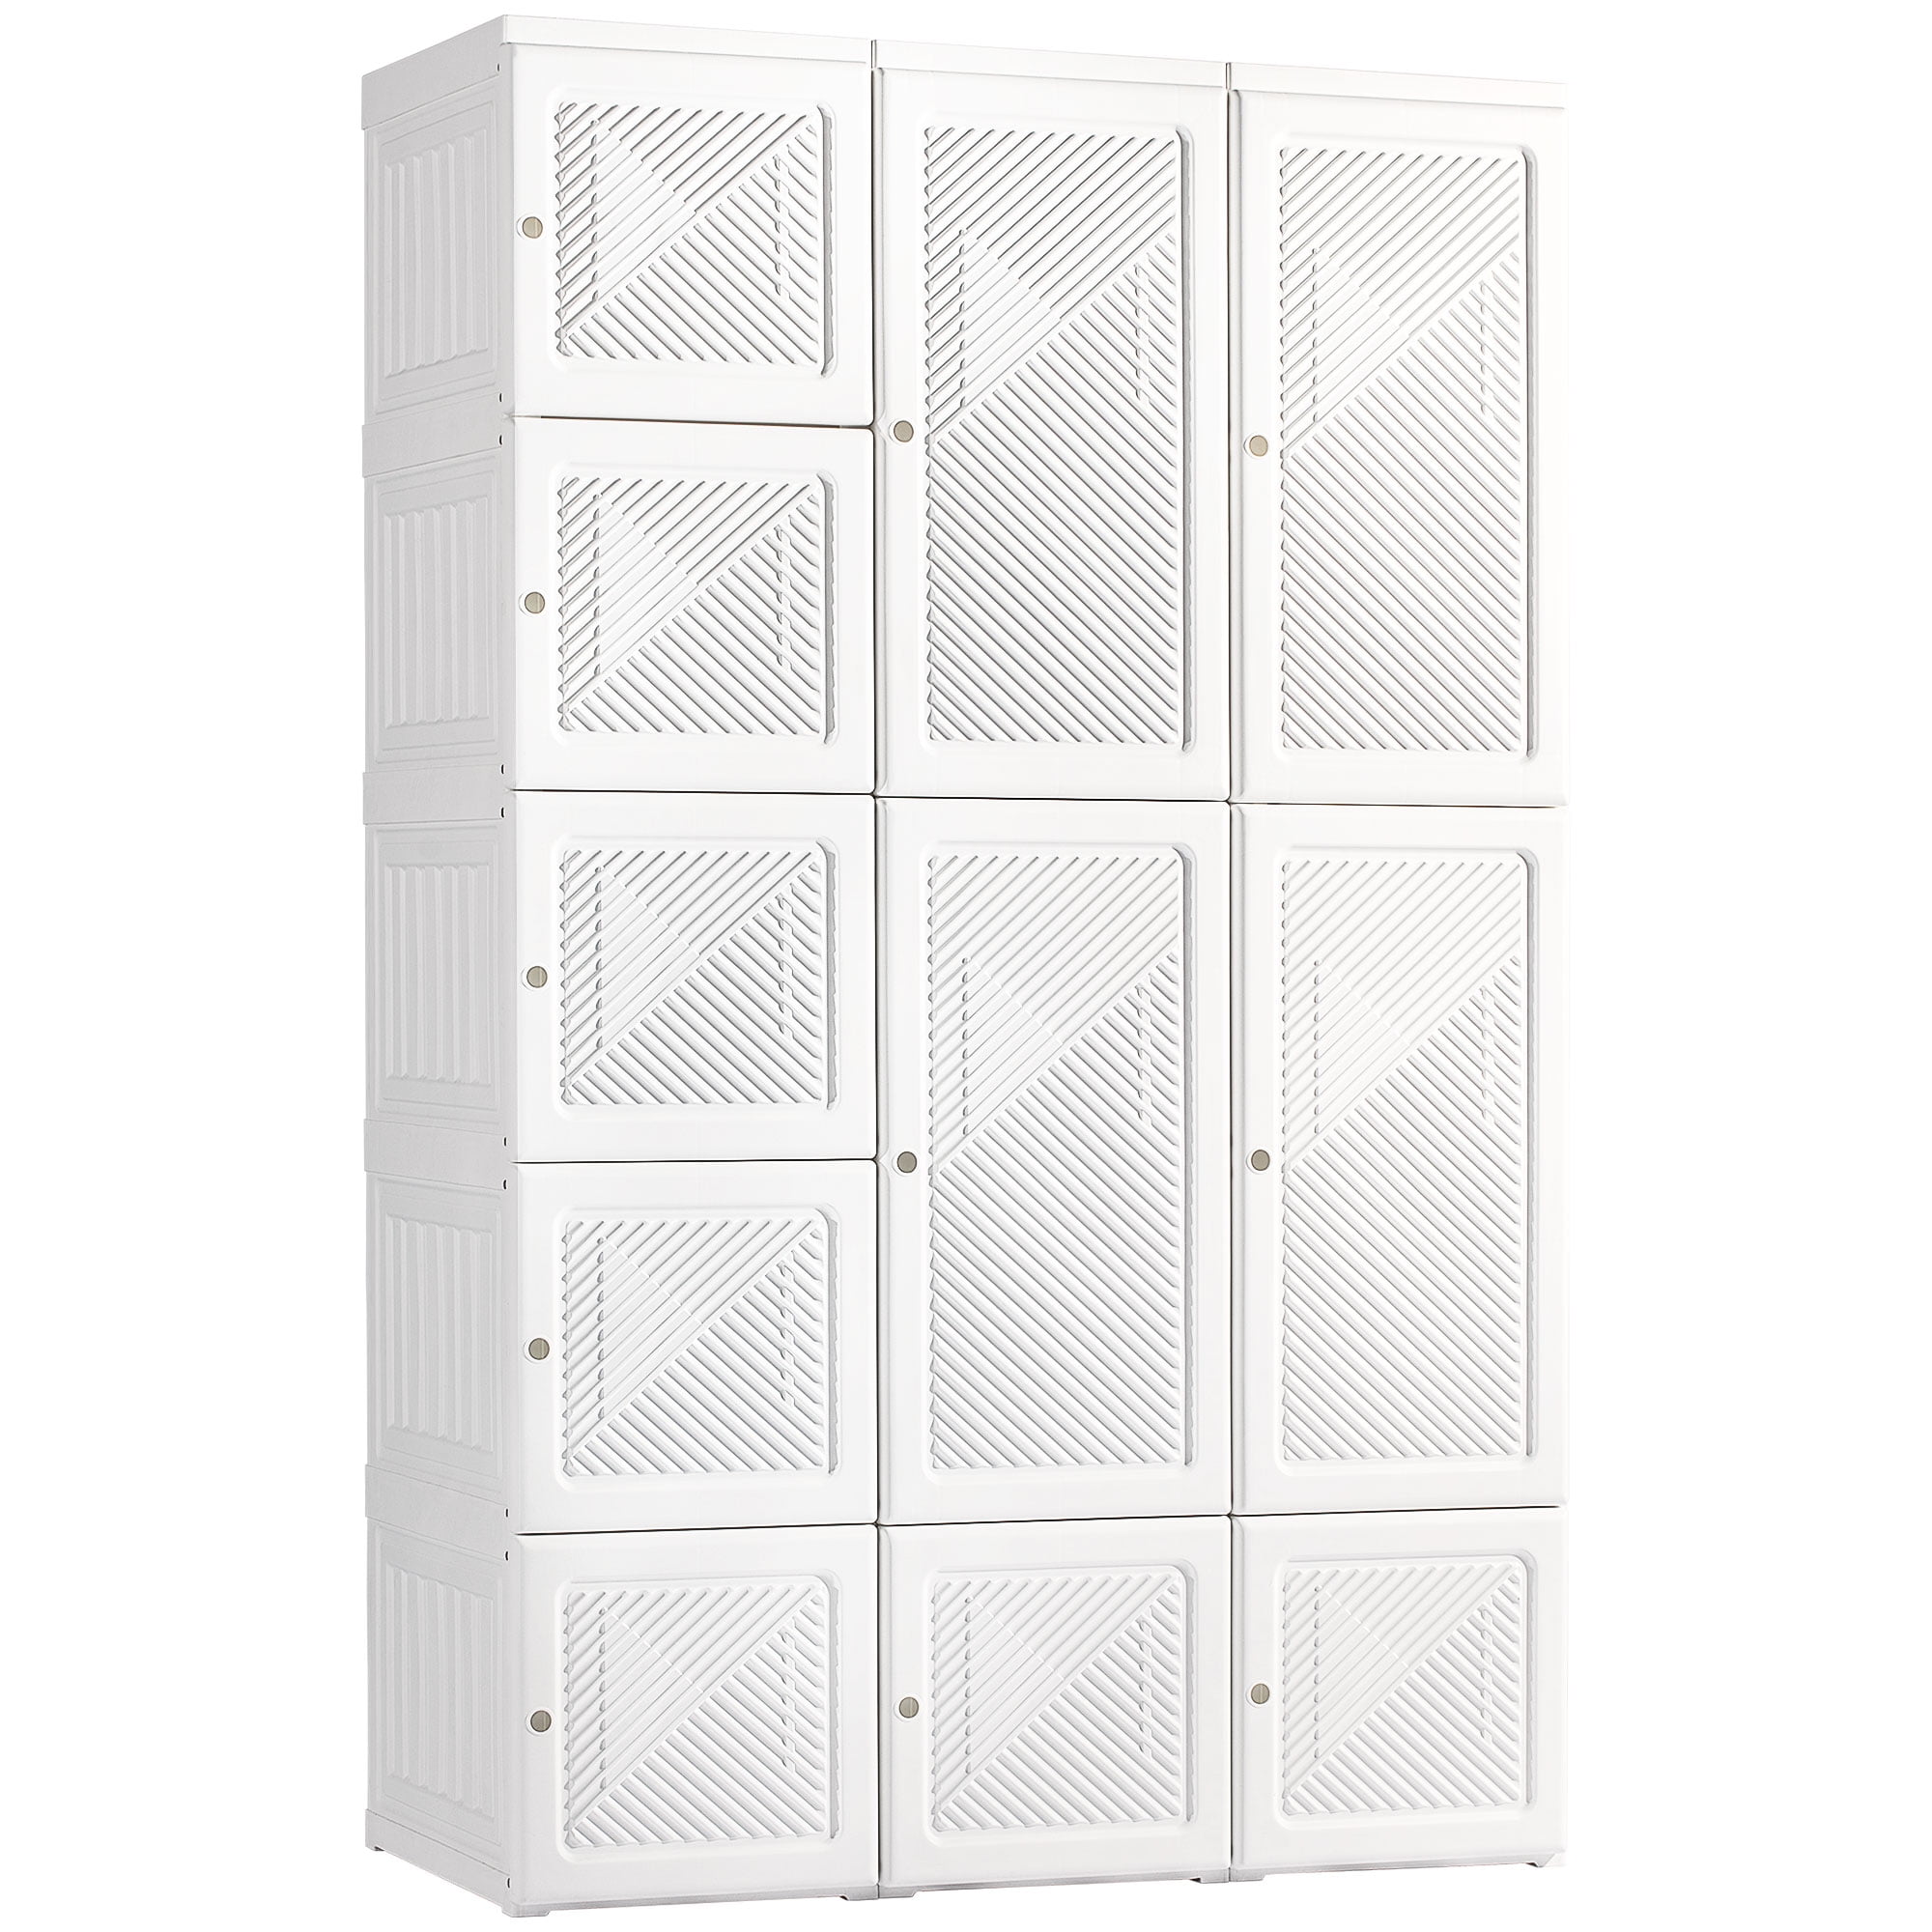 Homcom Portable Wardrobe Closet, Folding Bedroom Armoire, Clothes Storage  Organizer With Cube Compartments, Hanging Rod, Magnet Doors, White : Target